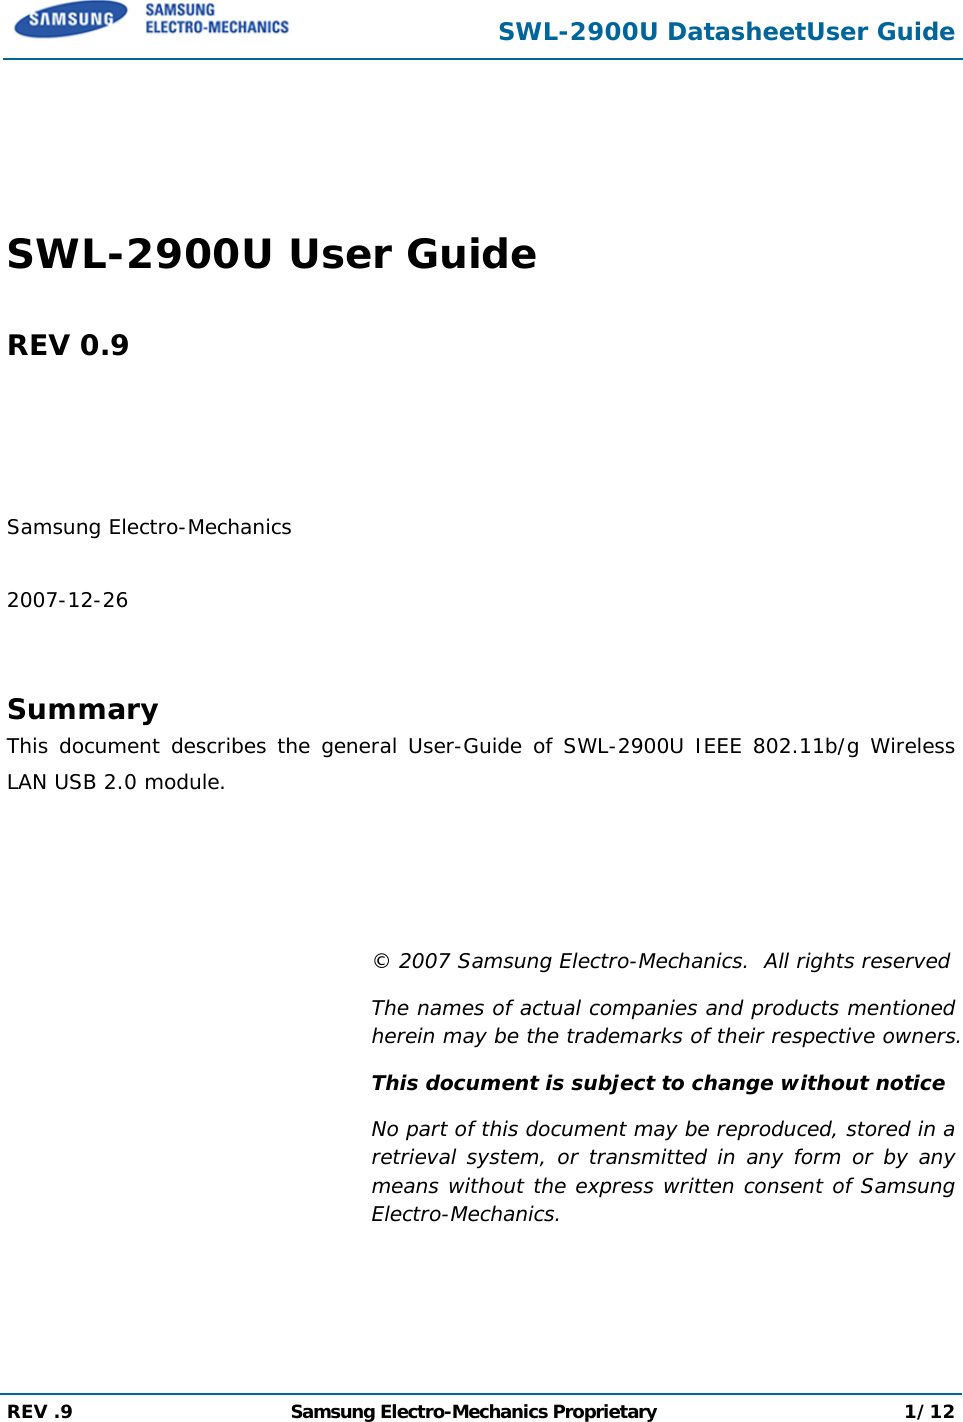  SWL-2900U DatasheetUser Guide  REV .9  Samsung Electro-Mechanics Proprietary 1/12     SWL-2900U User Guide  REV 0.9     Samsung Electro-Mechanics  2007-12-26   Summary This document describes the general User-Guide of SWL-2900U IEEE 802.11b/g Wireless LAN USB 2.0 module.     © 2007 Samsung Electro-Mechanics.  All rights reserved The names of actual companies and products mentioned herein may be the trademarks of their respective owners. This document is subject to change without notice No part of this document may be reproduced, stored in a retrieval system, or transmitted in any form or by any means without the express written consent of Samsung Electro-Mechanics.   